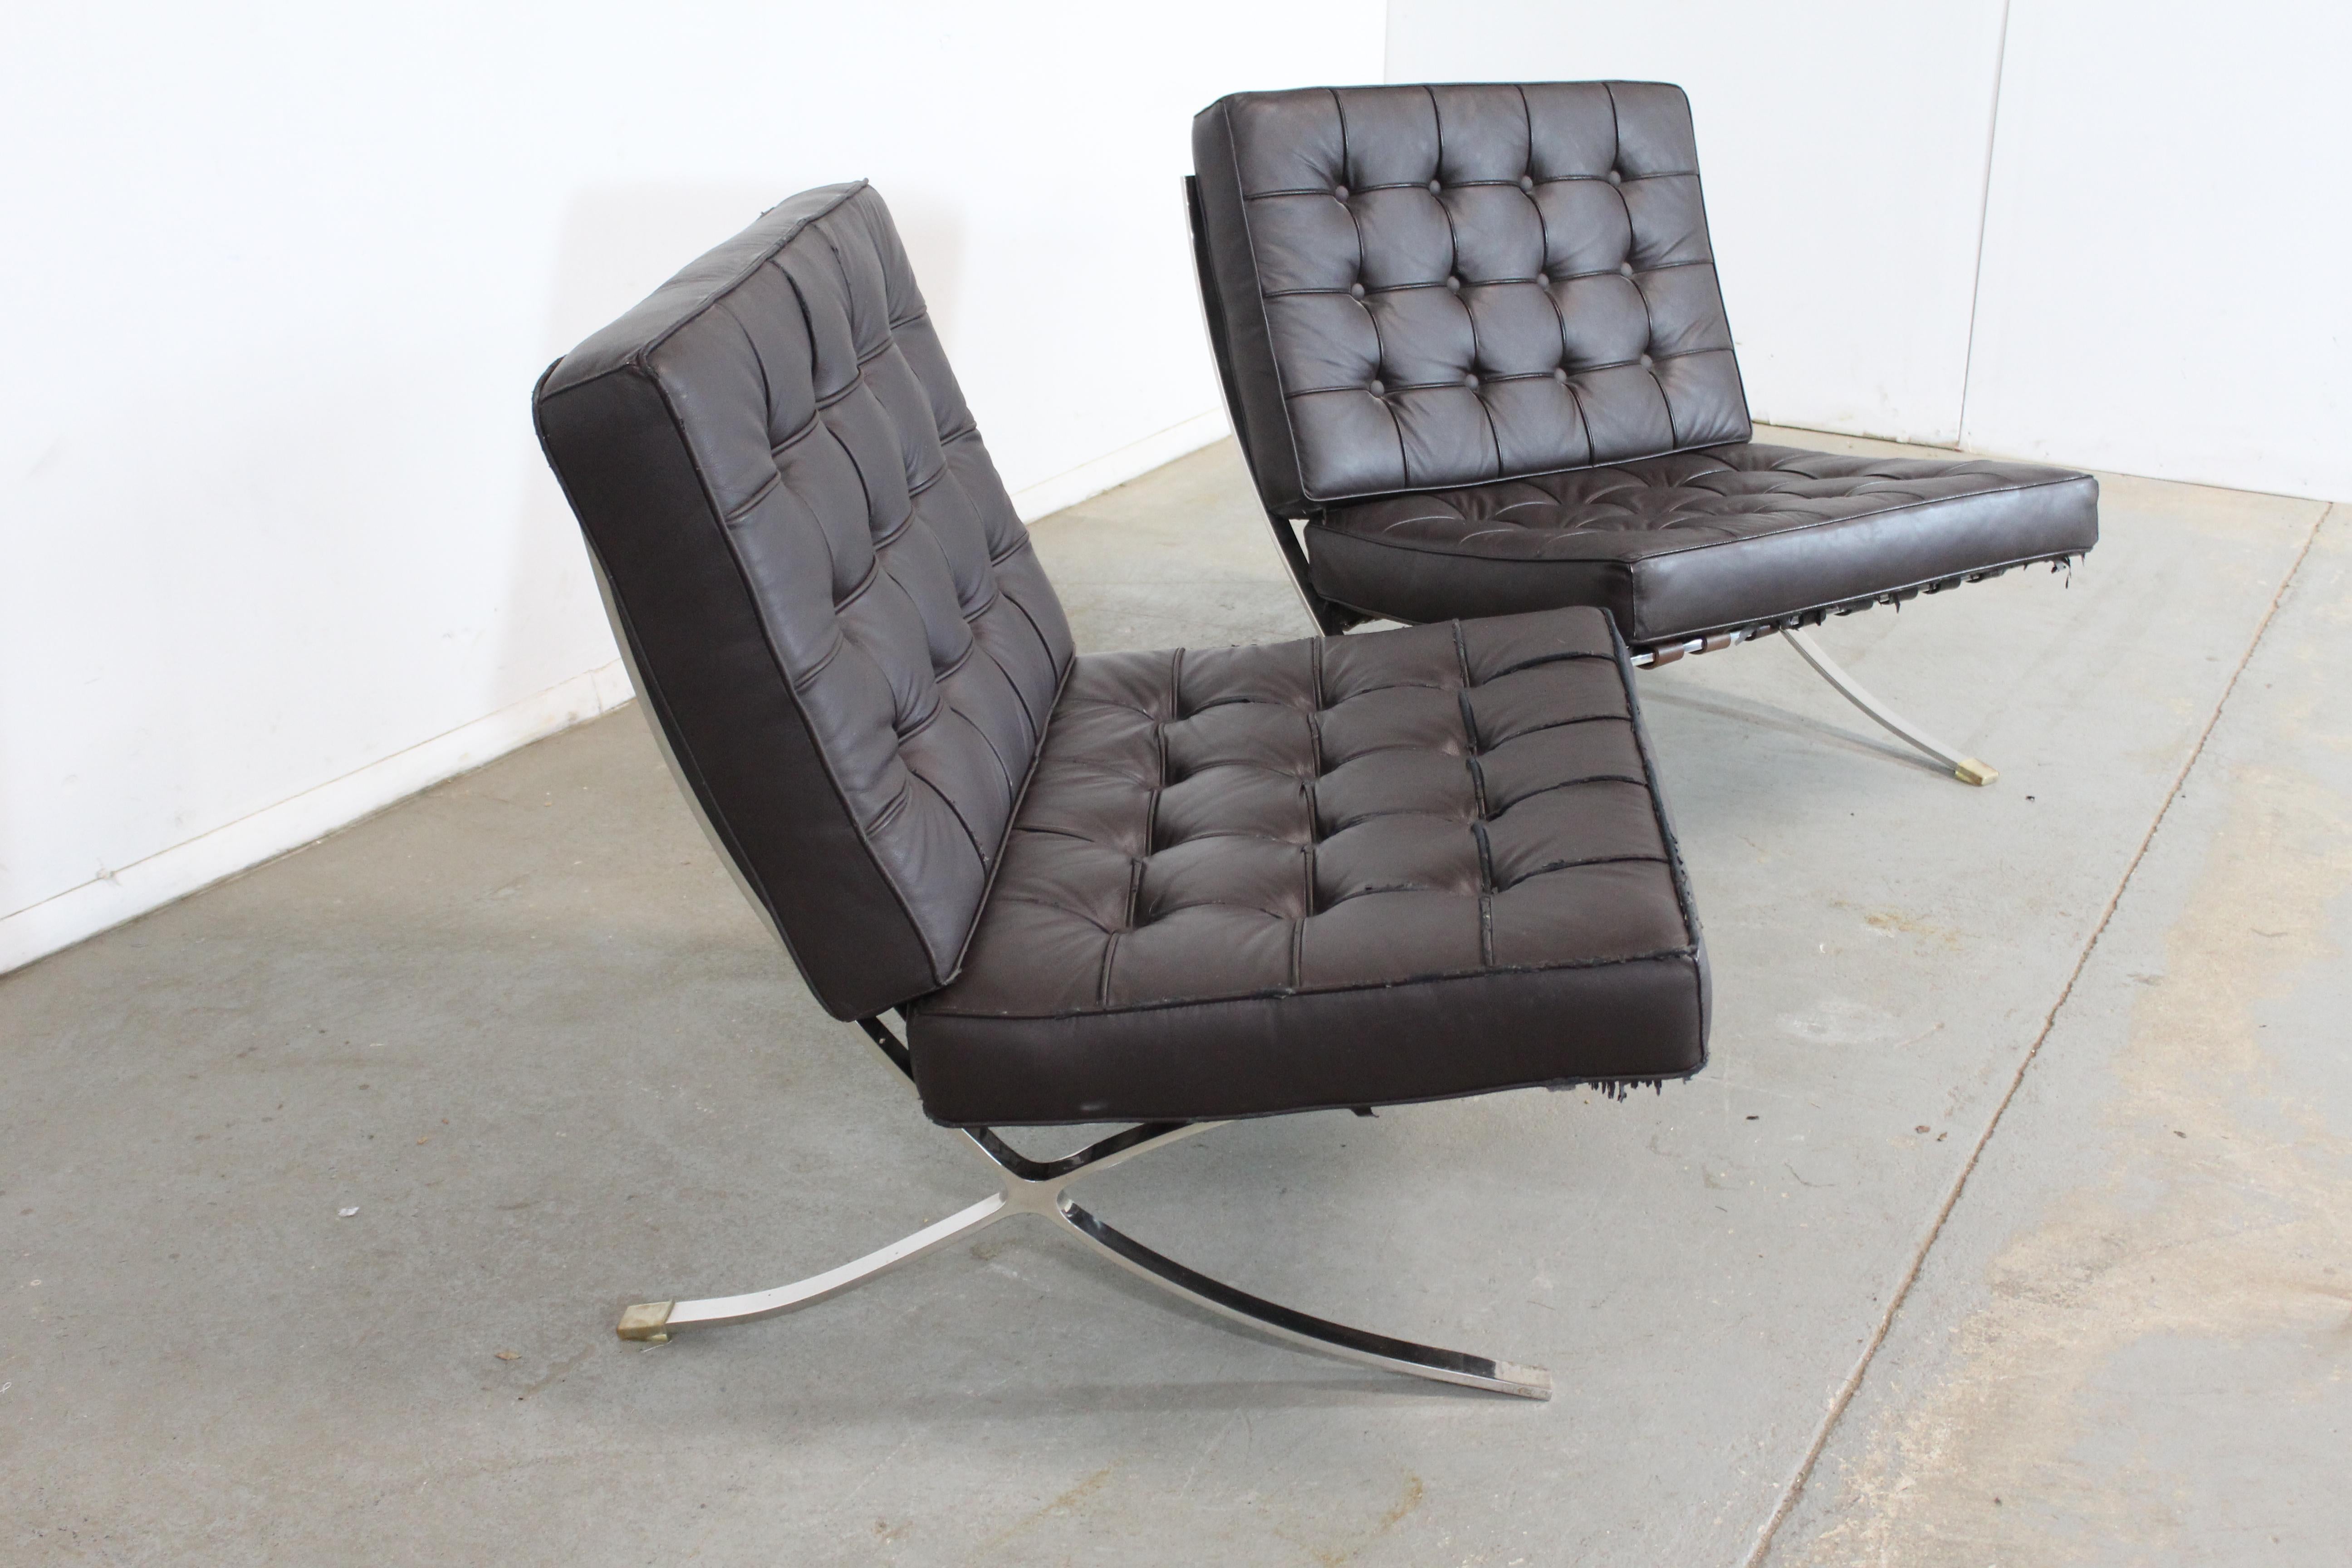 Unknown Pair of Vintage Mid-Century Modern Chrome Barcelona Style Lounge Chairs For Sale